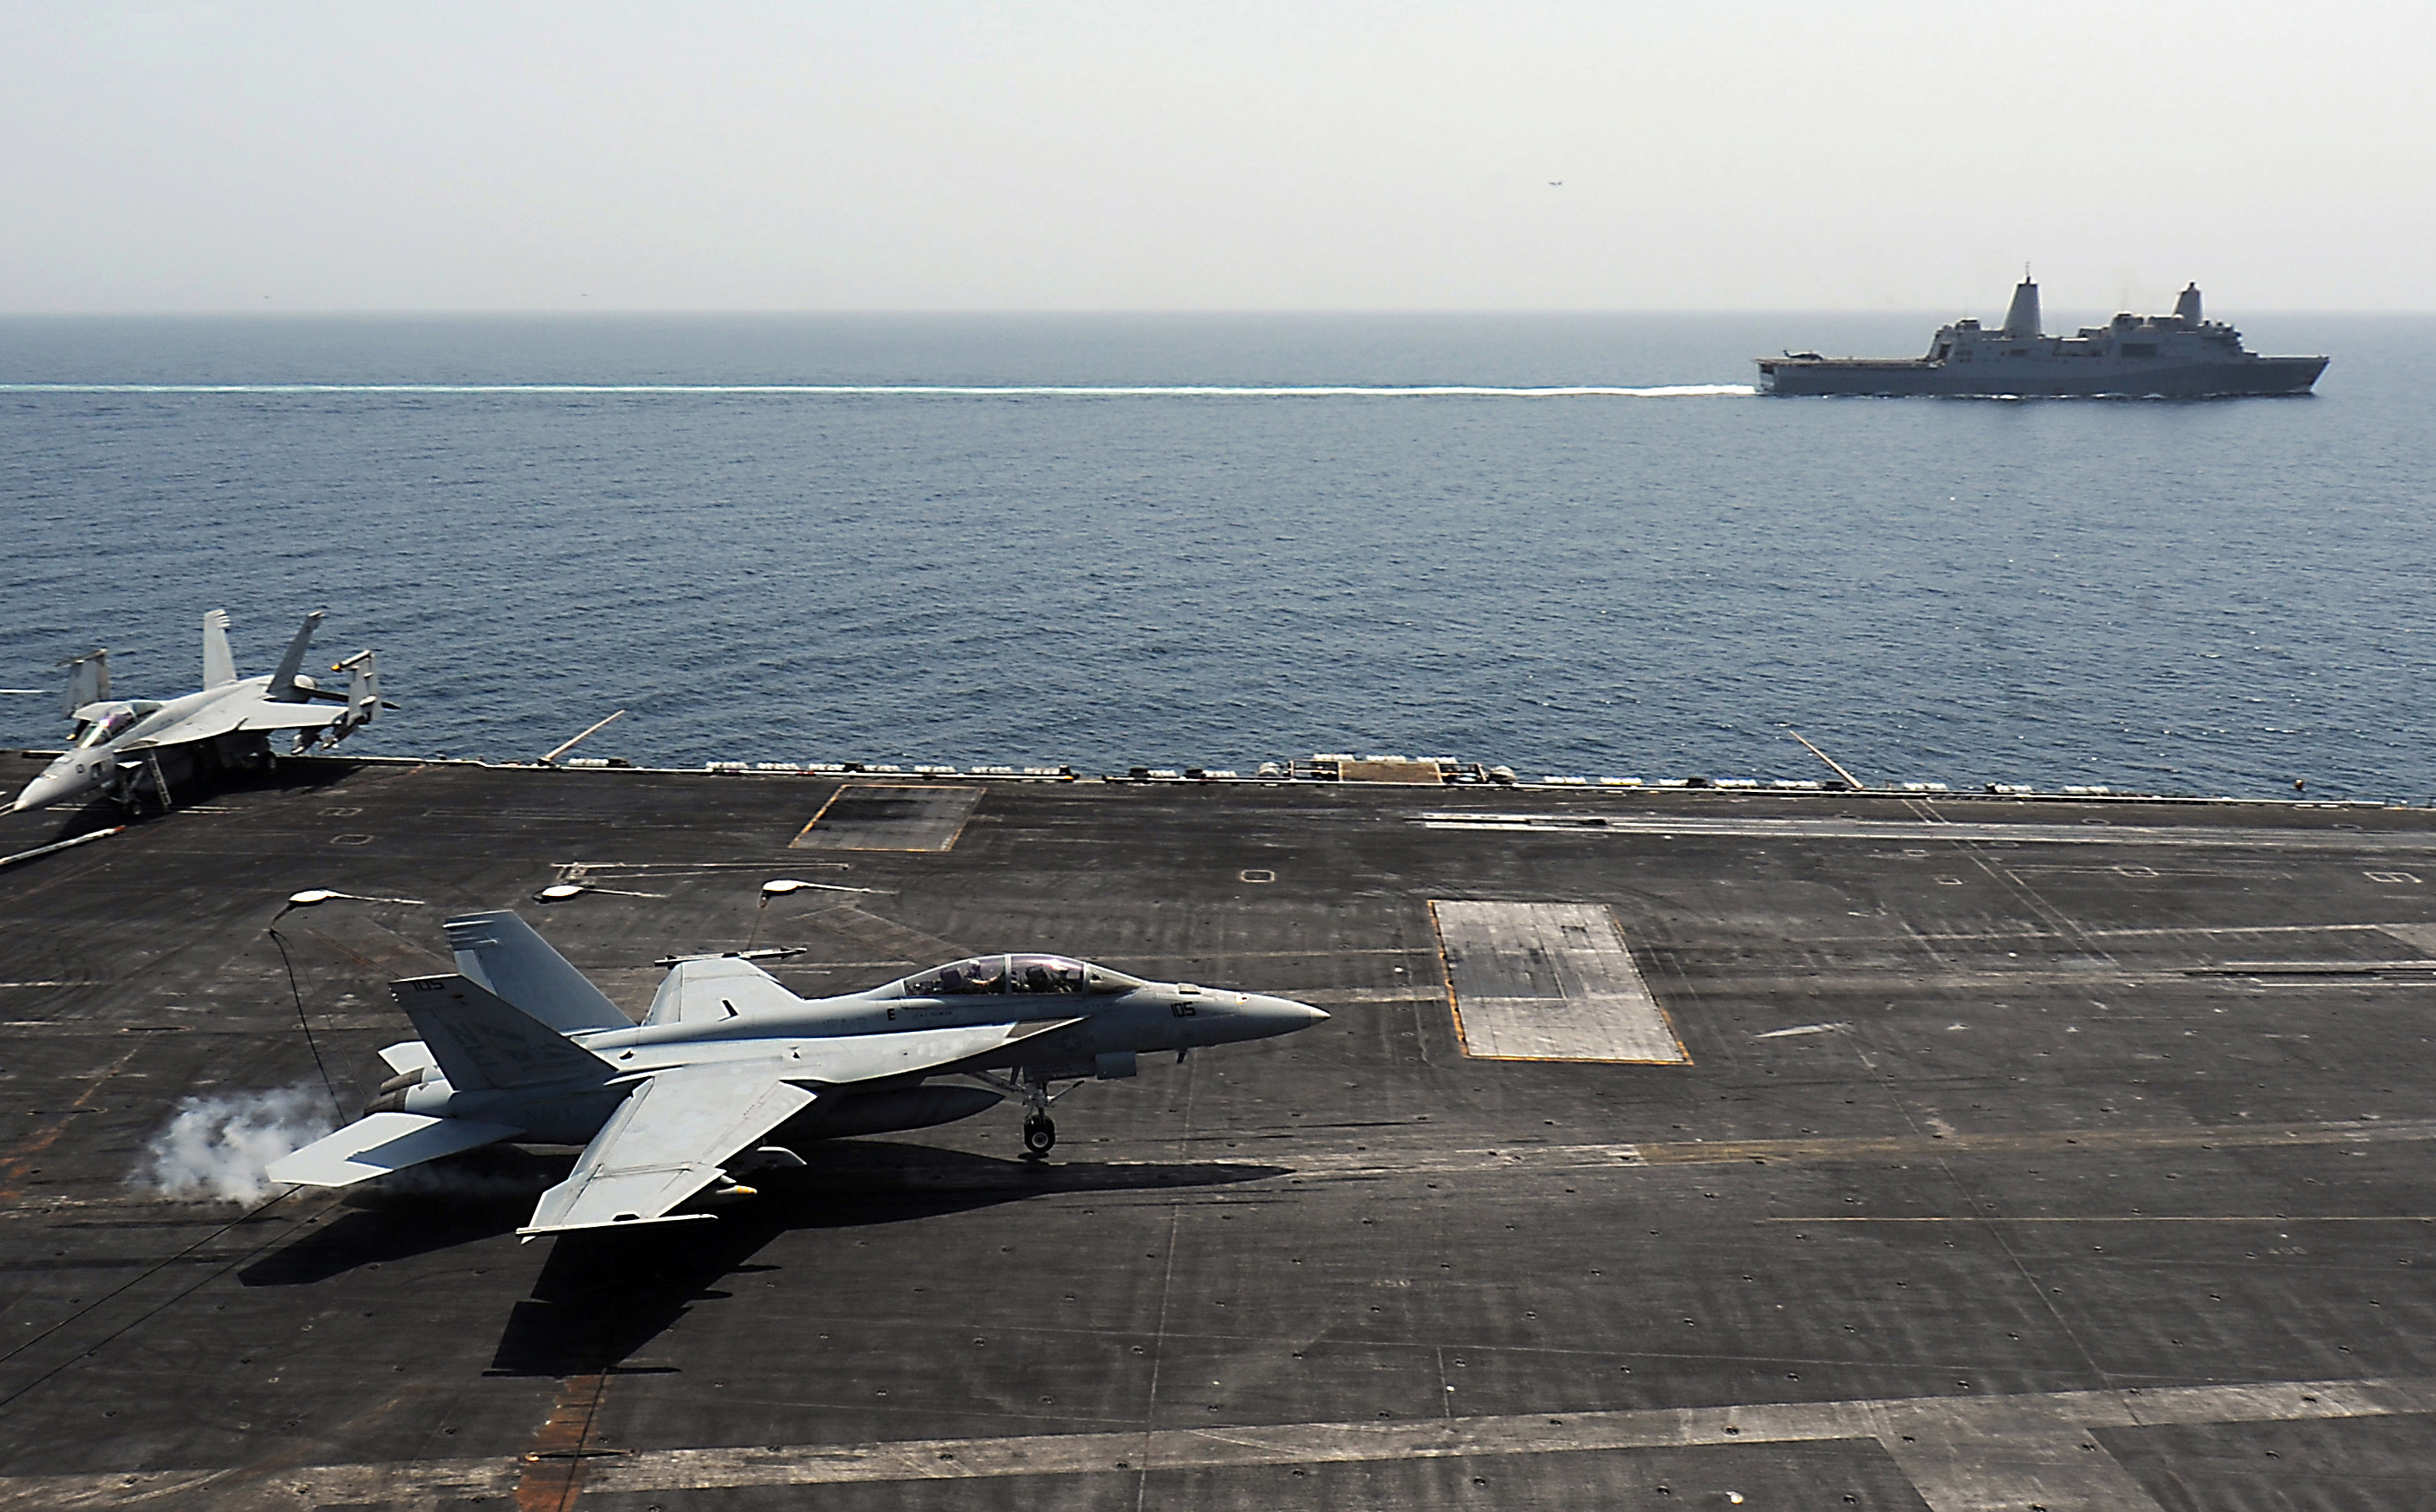 An F/A-18F Super Hornet assigned to the Bounty Hunters of Strike Fighter Squadron (VFA) 2 lands on the flight deck of the Nimitz-class aircraft carrier USS Abraham Lincoln (CVN 72) as the amphibious transport dock ship USS New Orleans (LPD 18) transits alongside in April 2012. US Navy photo.